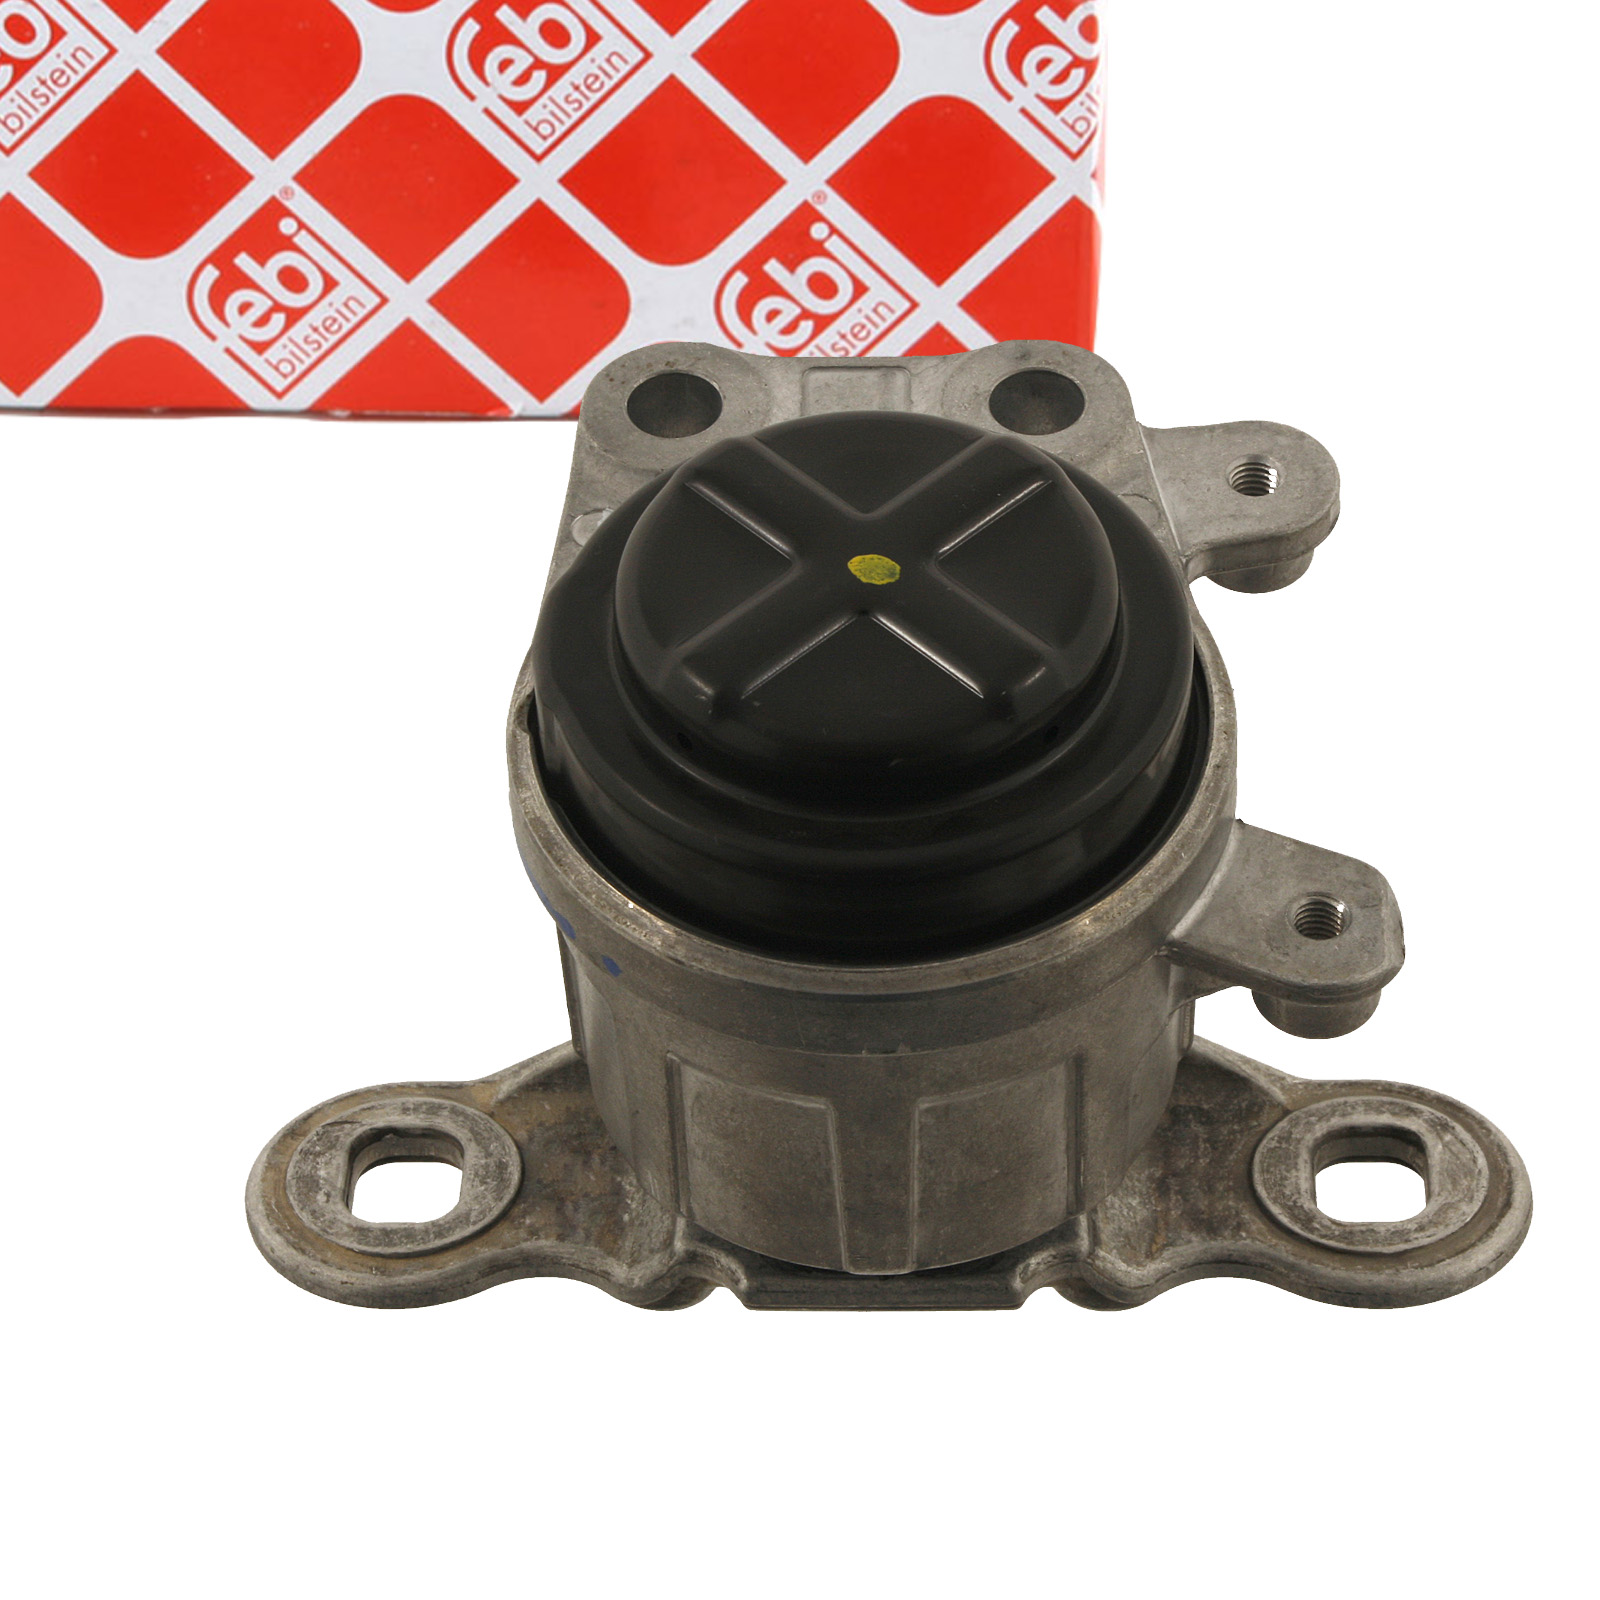 FEBI 30062 Motorlager Hydrolager Lagerung Motor FORD Mondeo 3 2.0-2.2 TDCi rechts 1117880